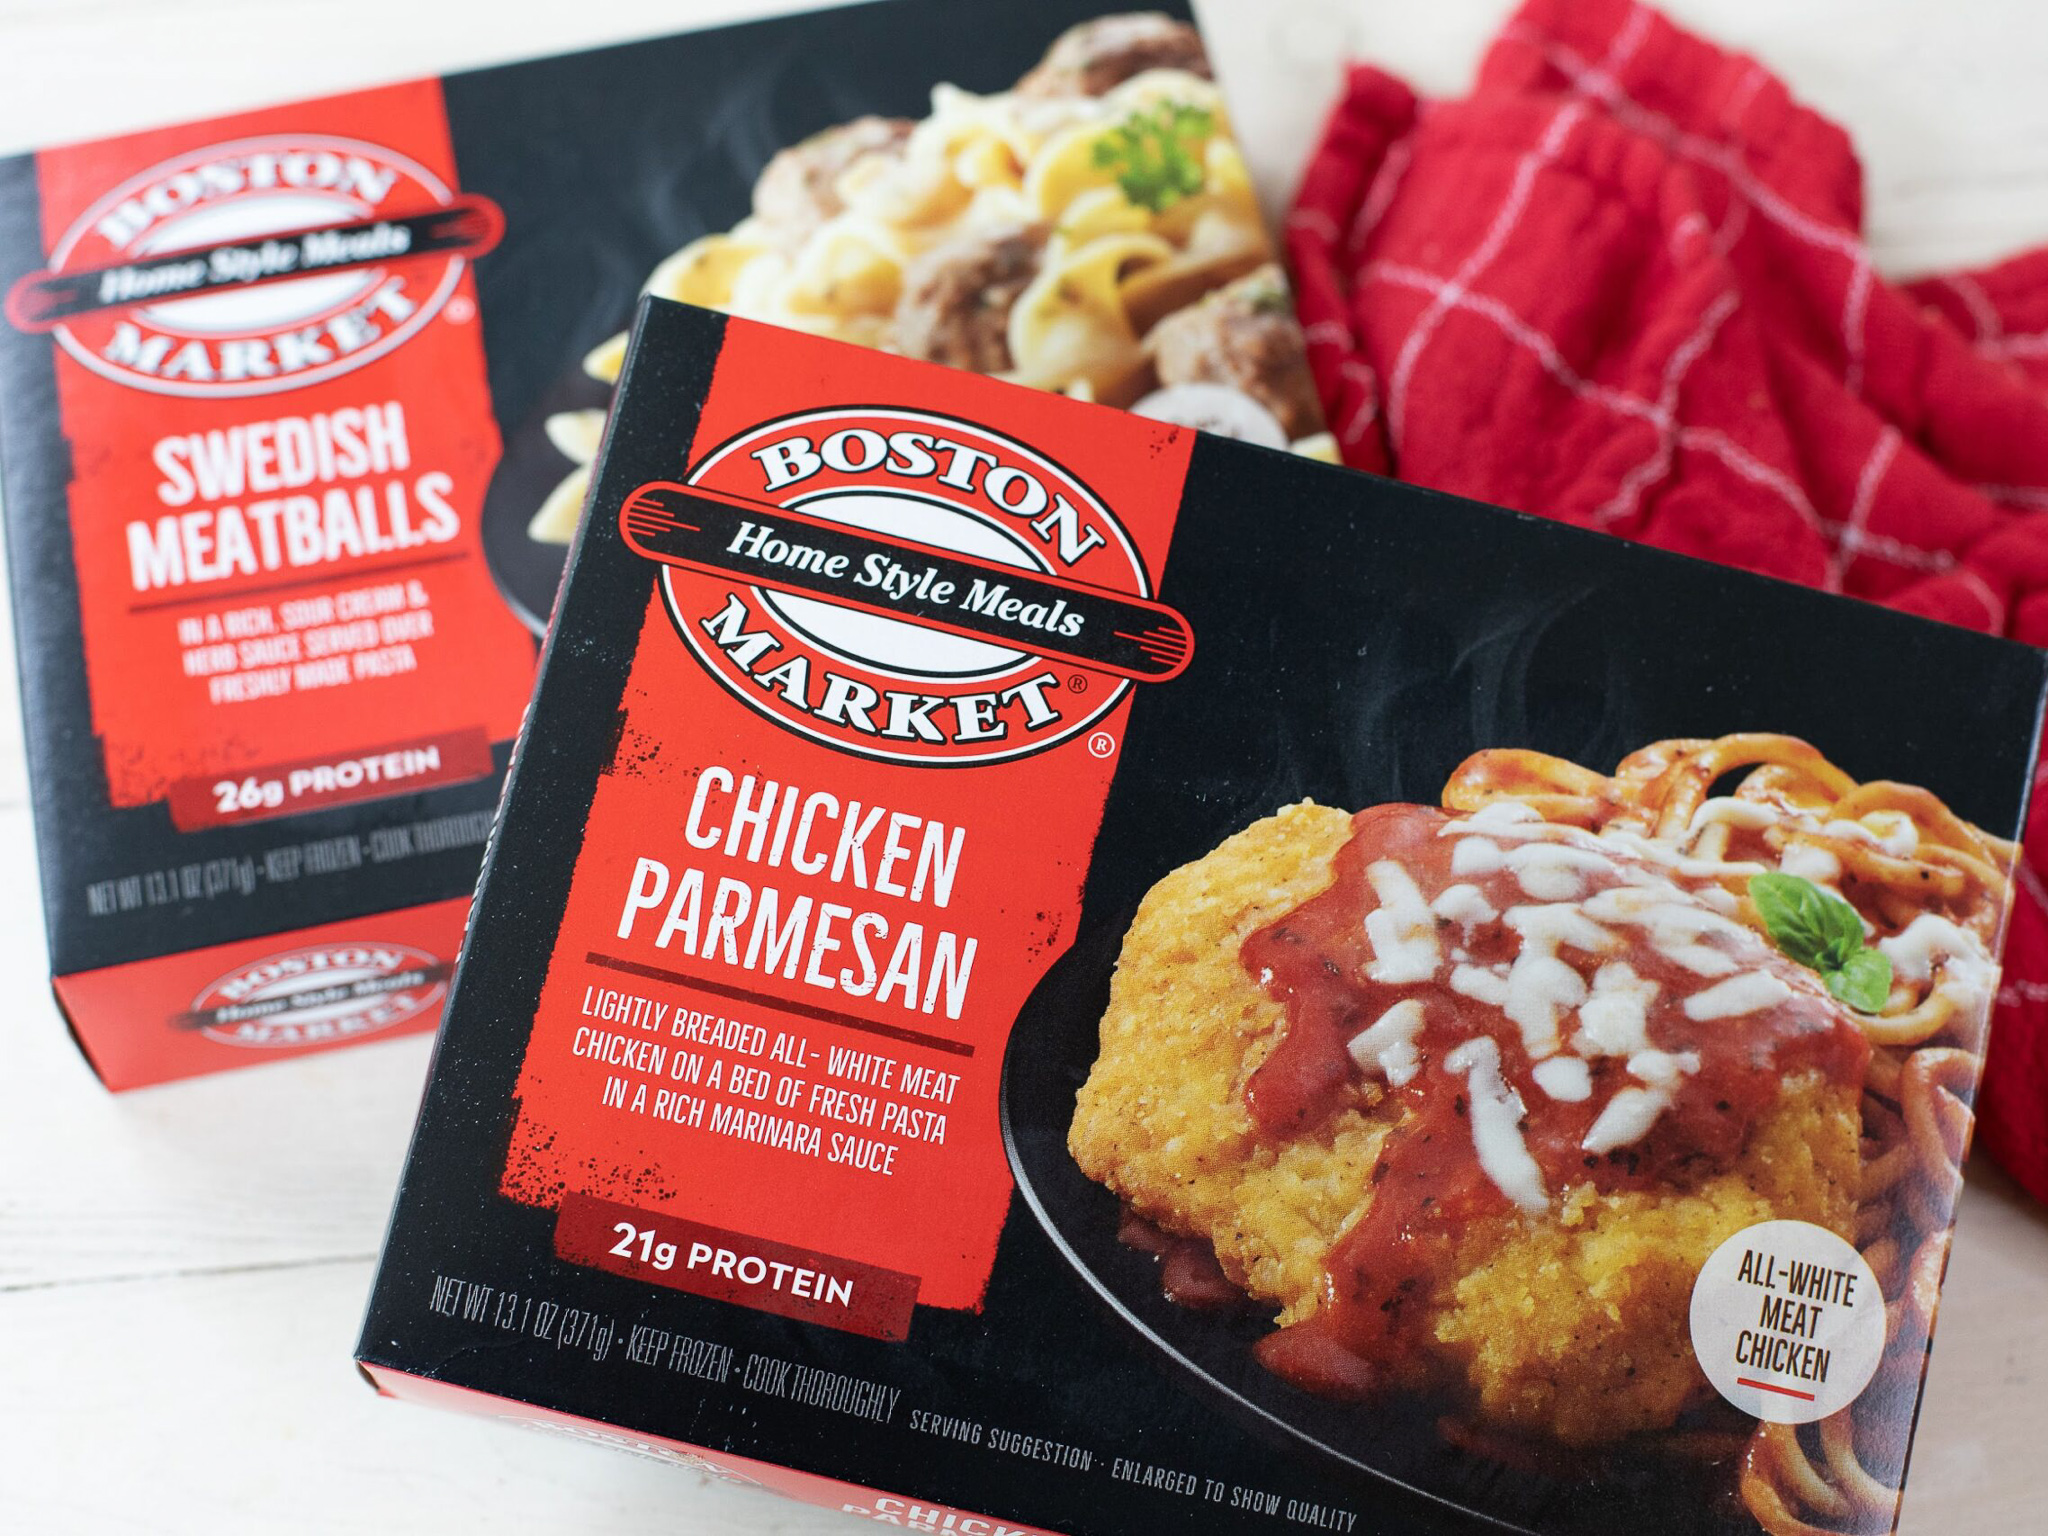 Boston Market Meals As Low As $1.74 At Kroger